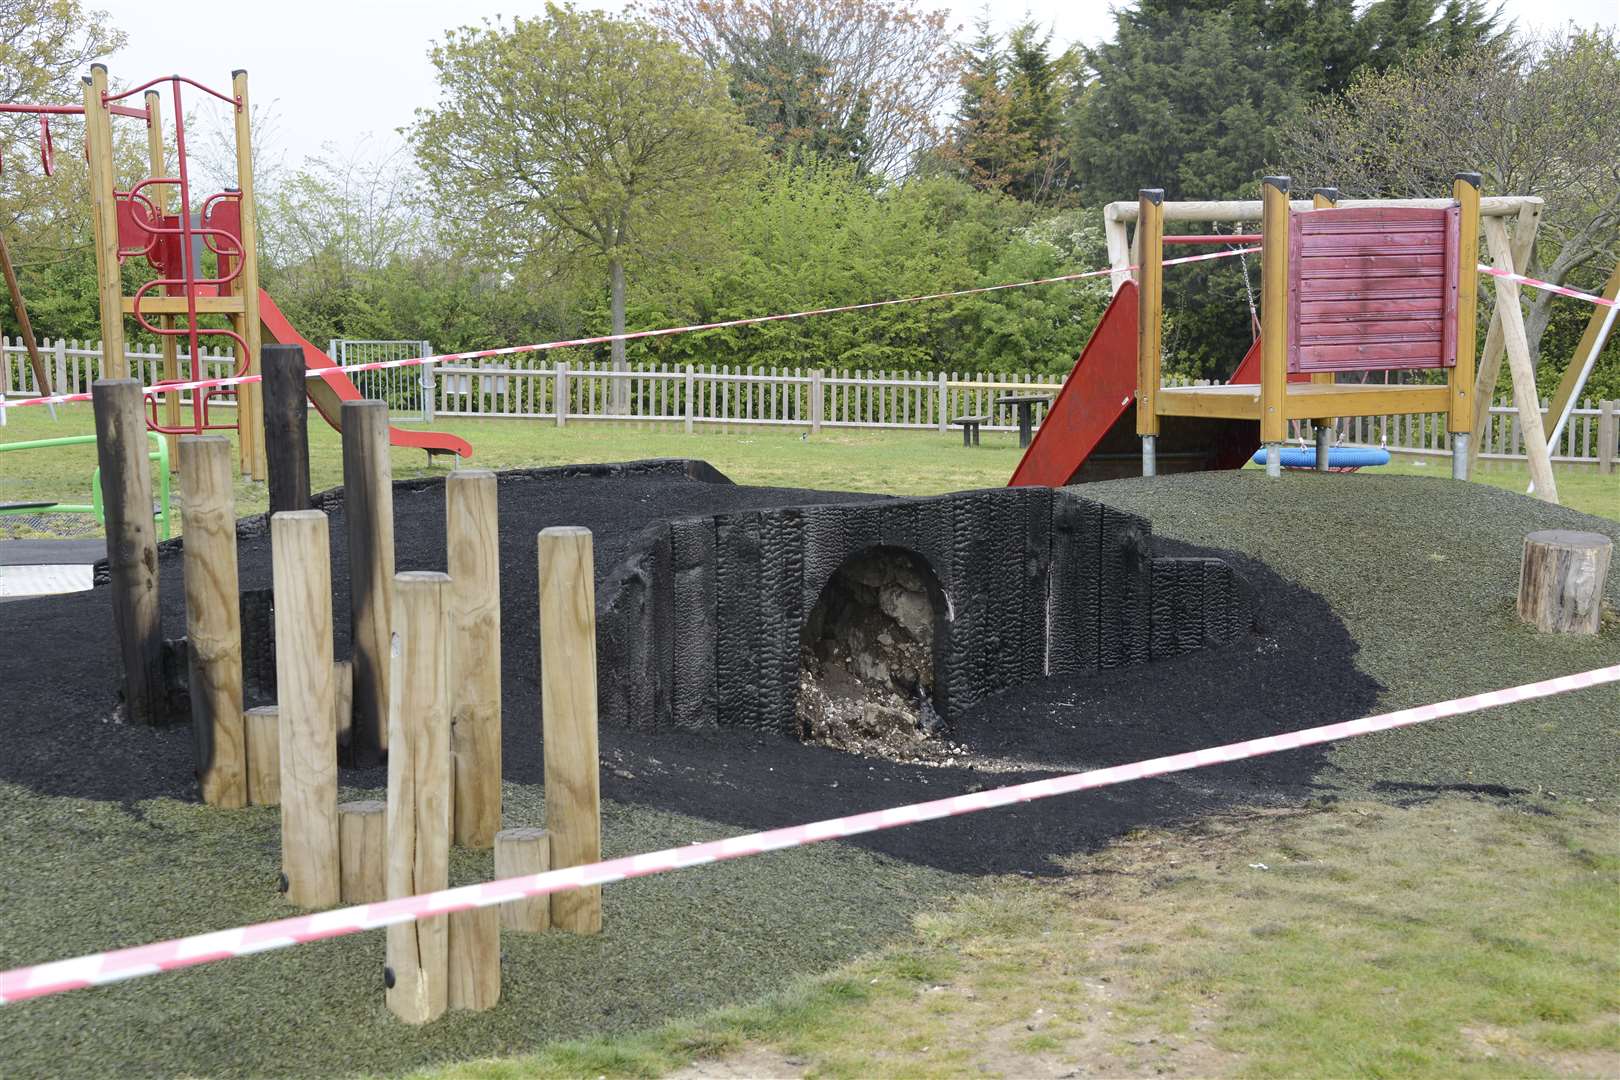 The play area is closed following the fire